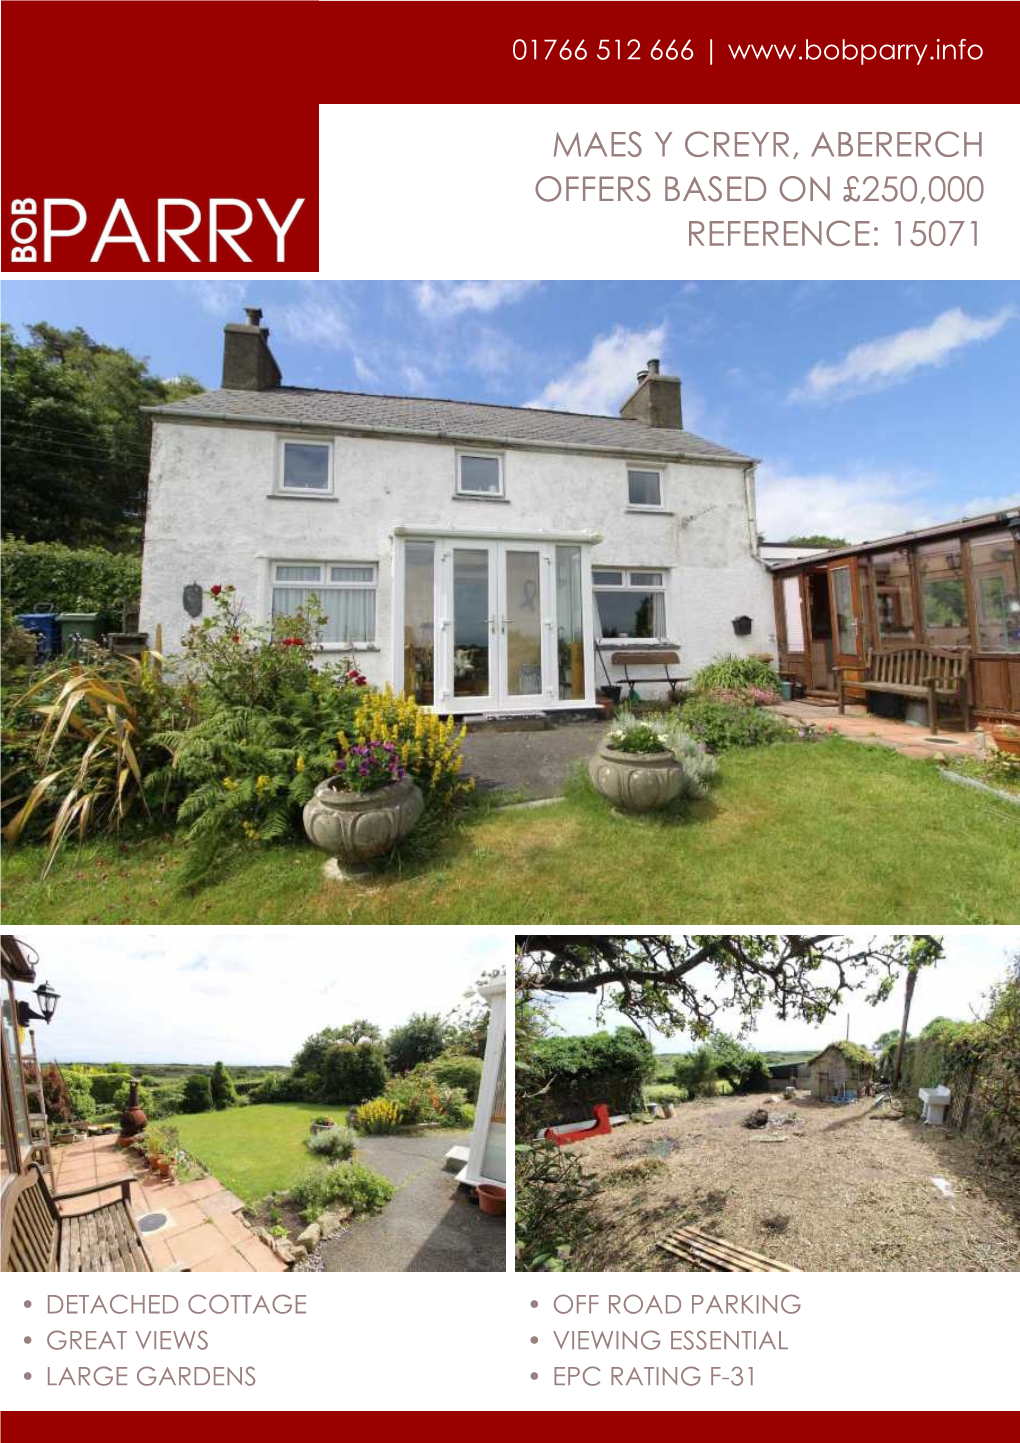 Maes Y Creyr, Abererch Offers Based on £250,000 Reference: 15071